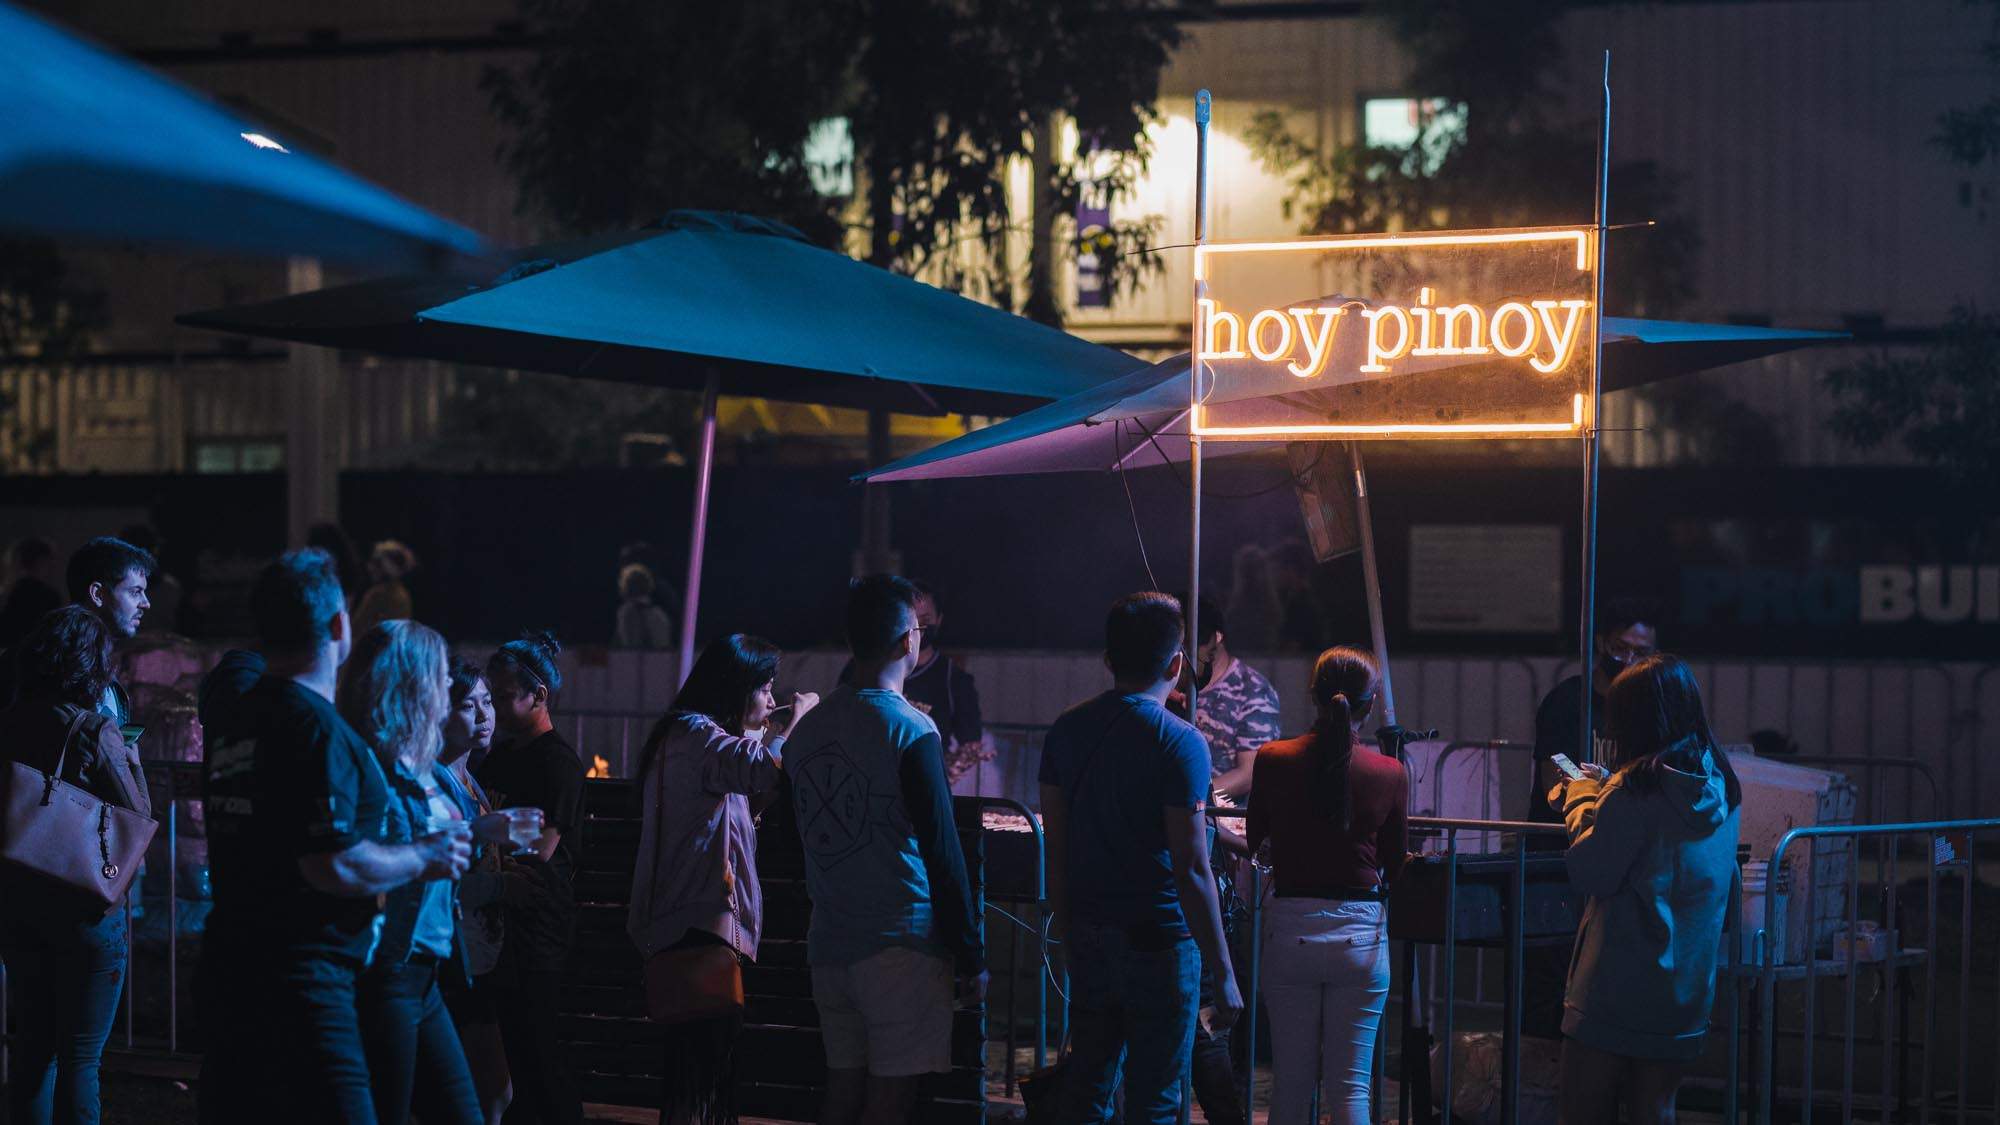 Brisbane's Night Noodle Markets Have Been Postponed Due to Travel and Quarantine Restrictions